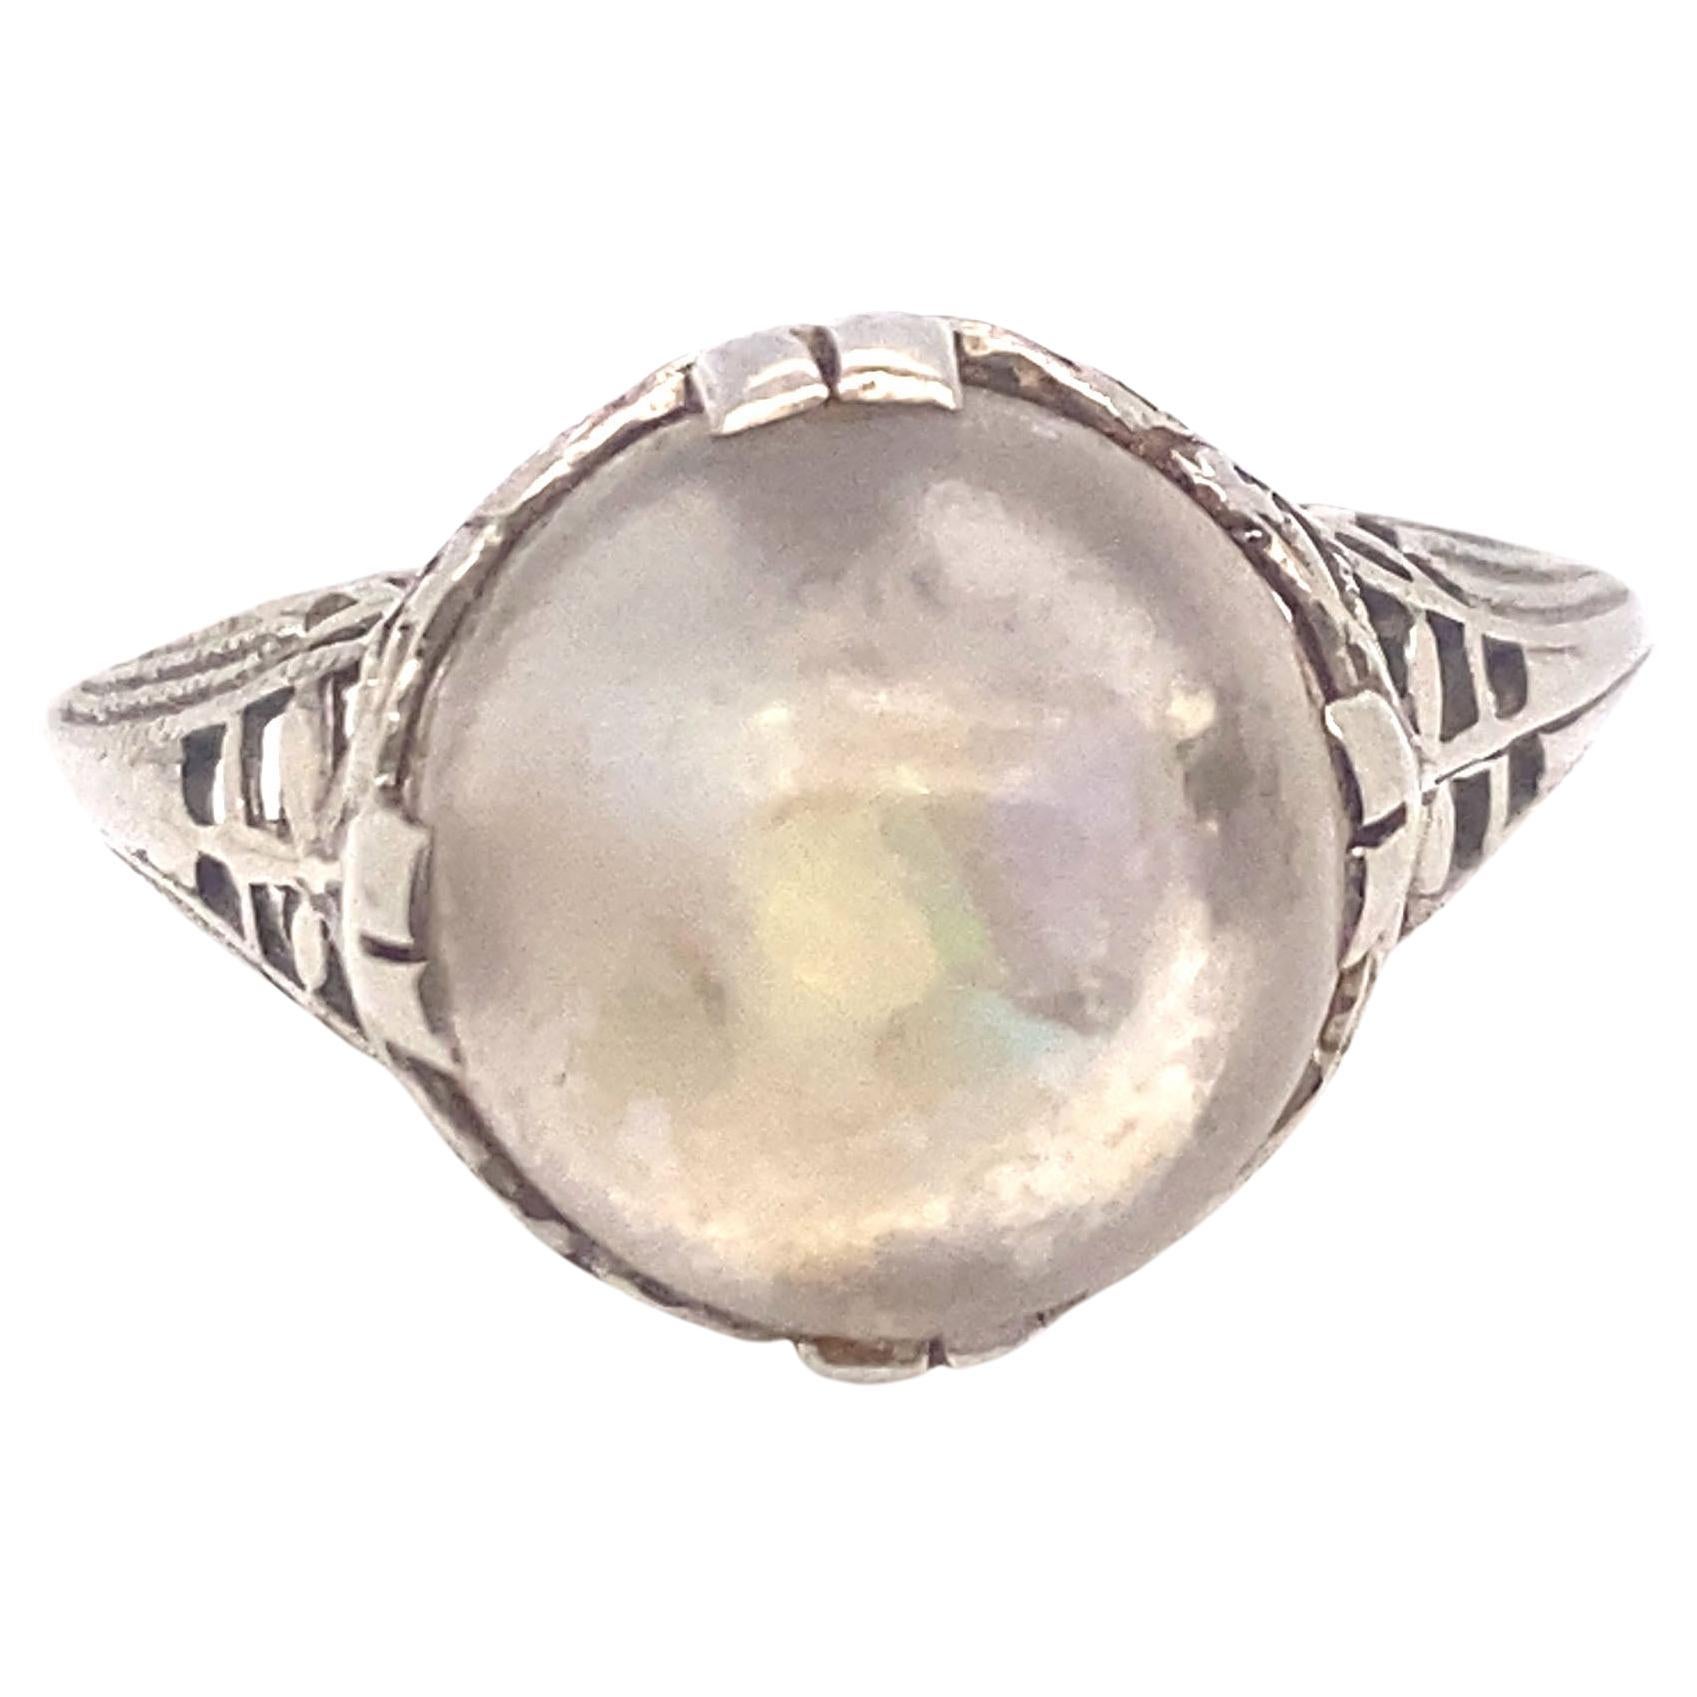 Pieces of Opal Gemstone Cocktail Crystal Ball Ring 18K White Gold Vintage Style For Sale